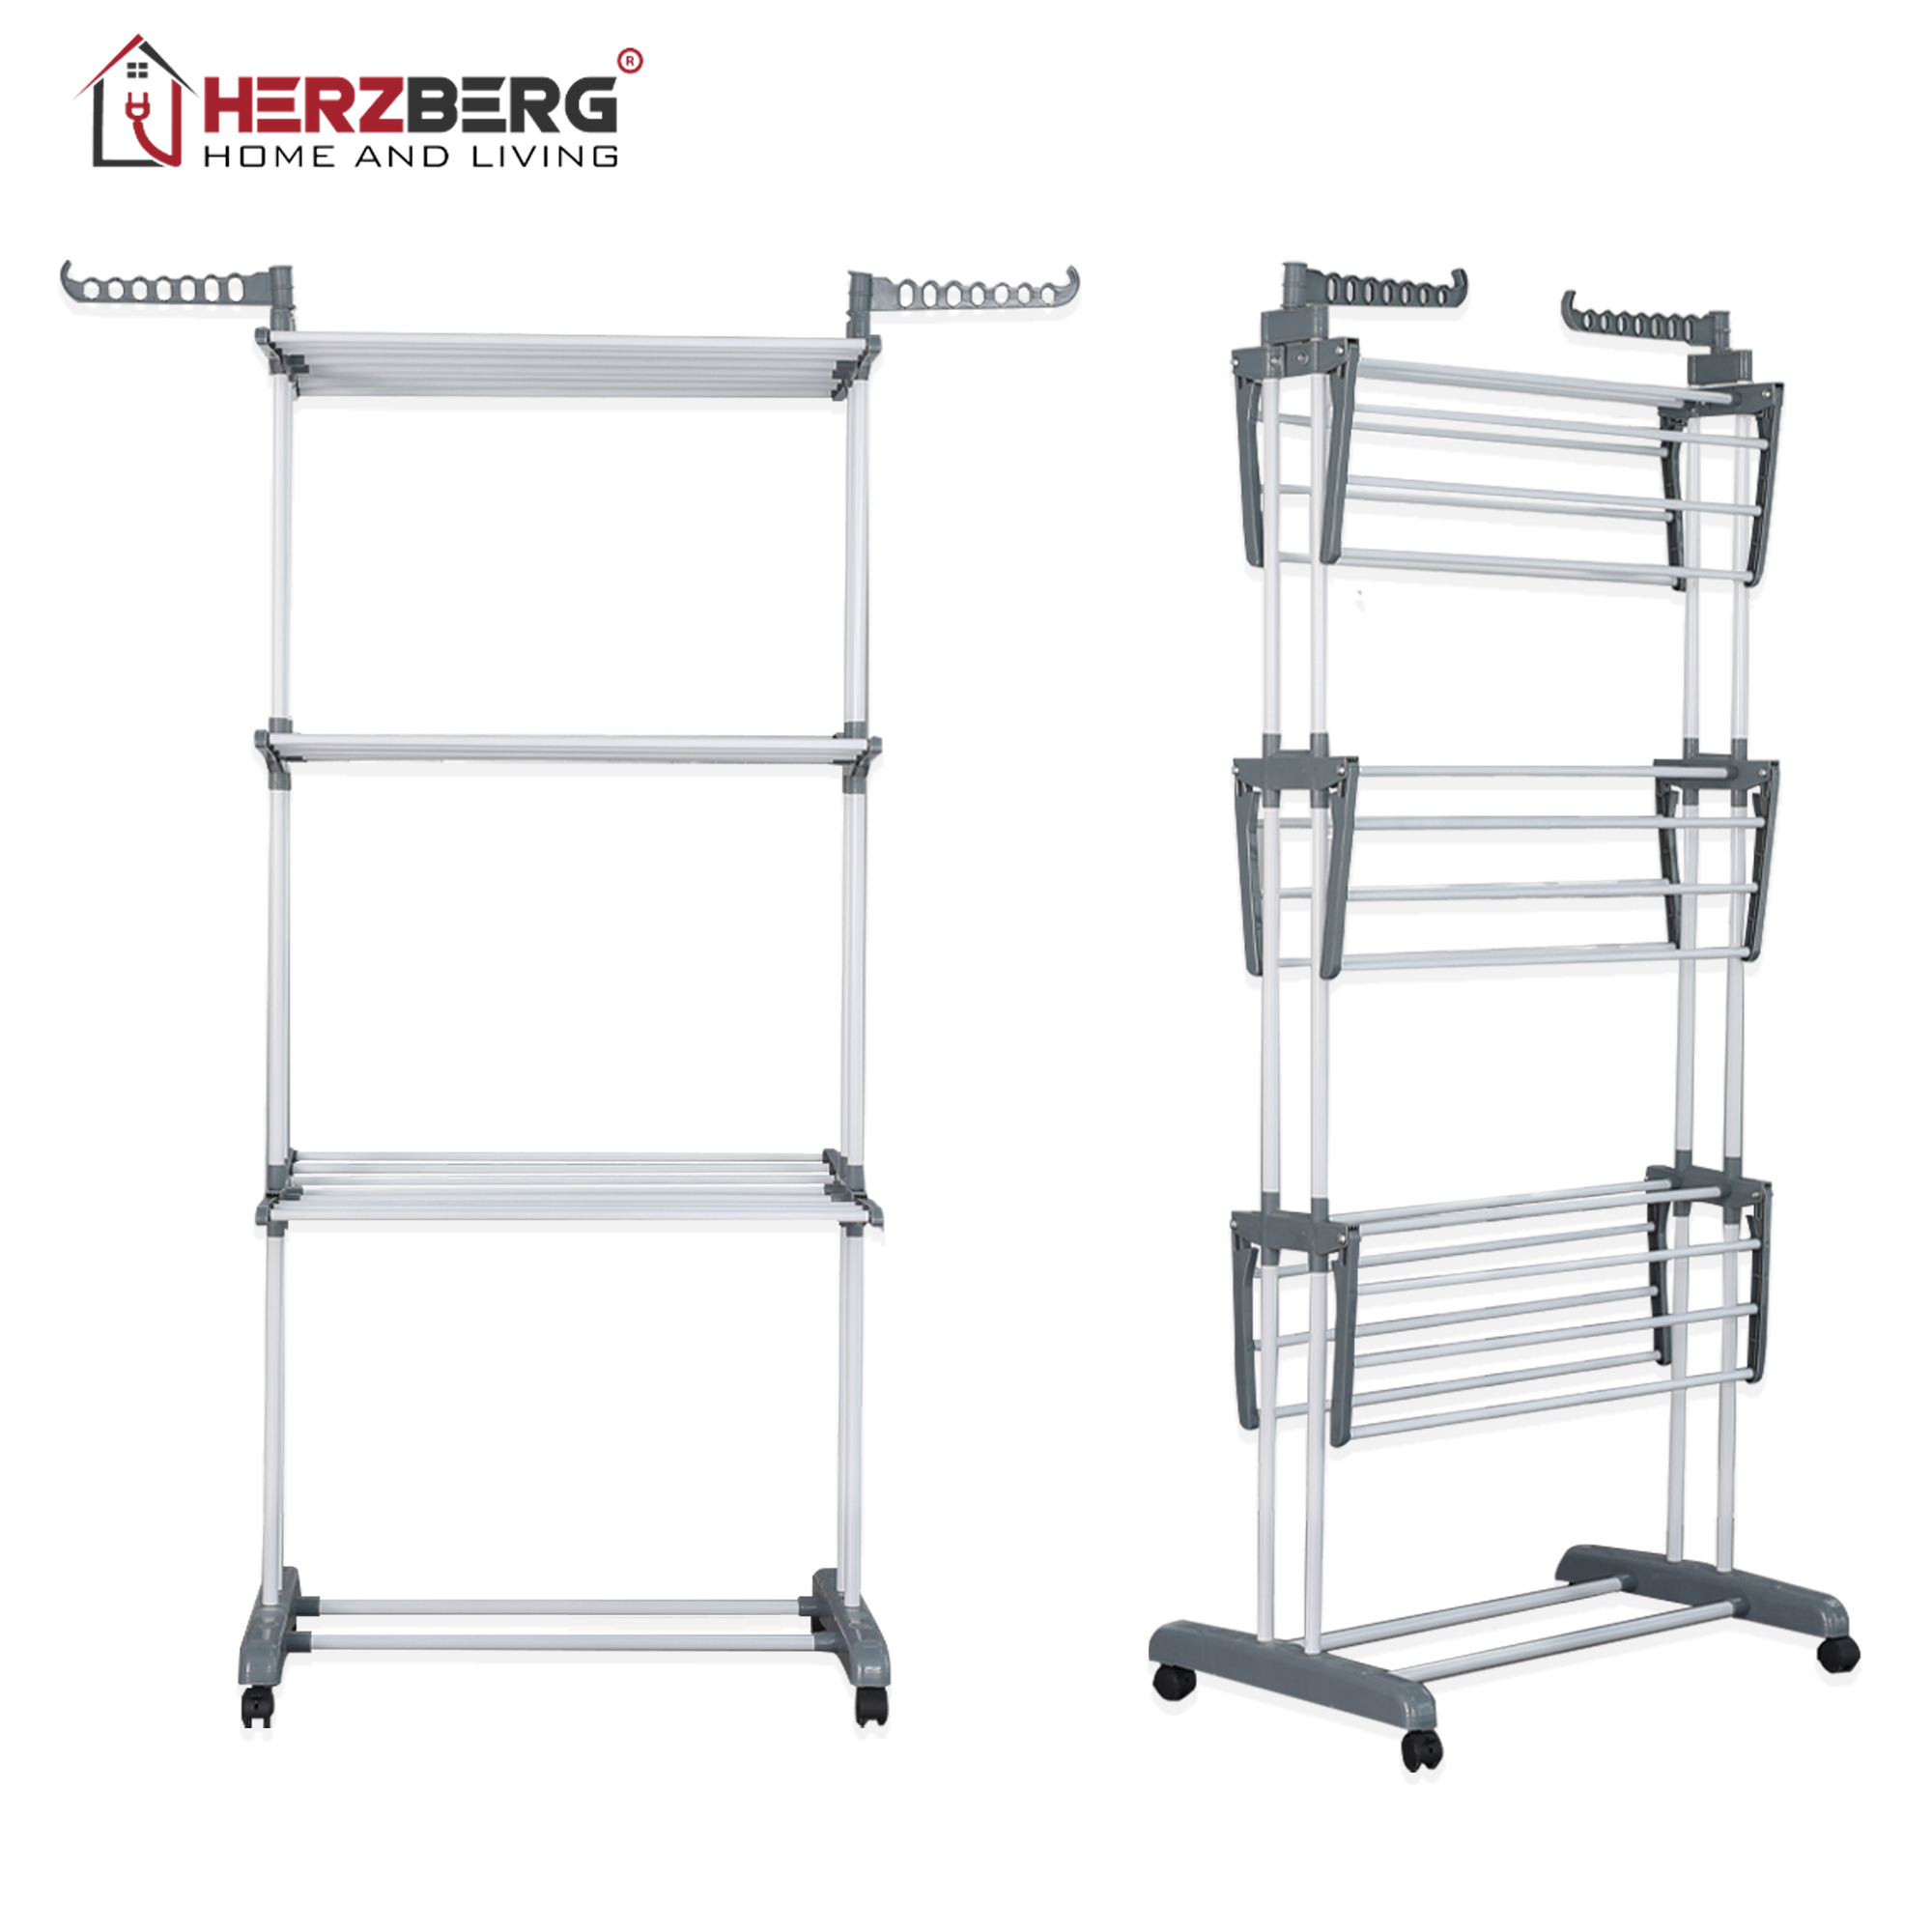 Herzberg HG-8034GRY: Moving Clothes Rack - Grey